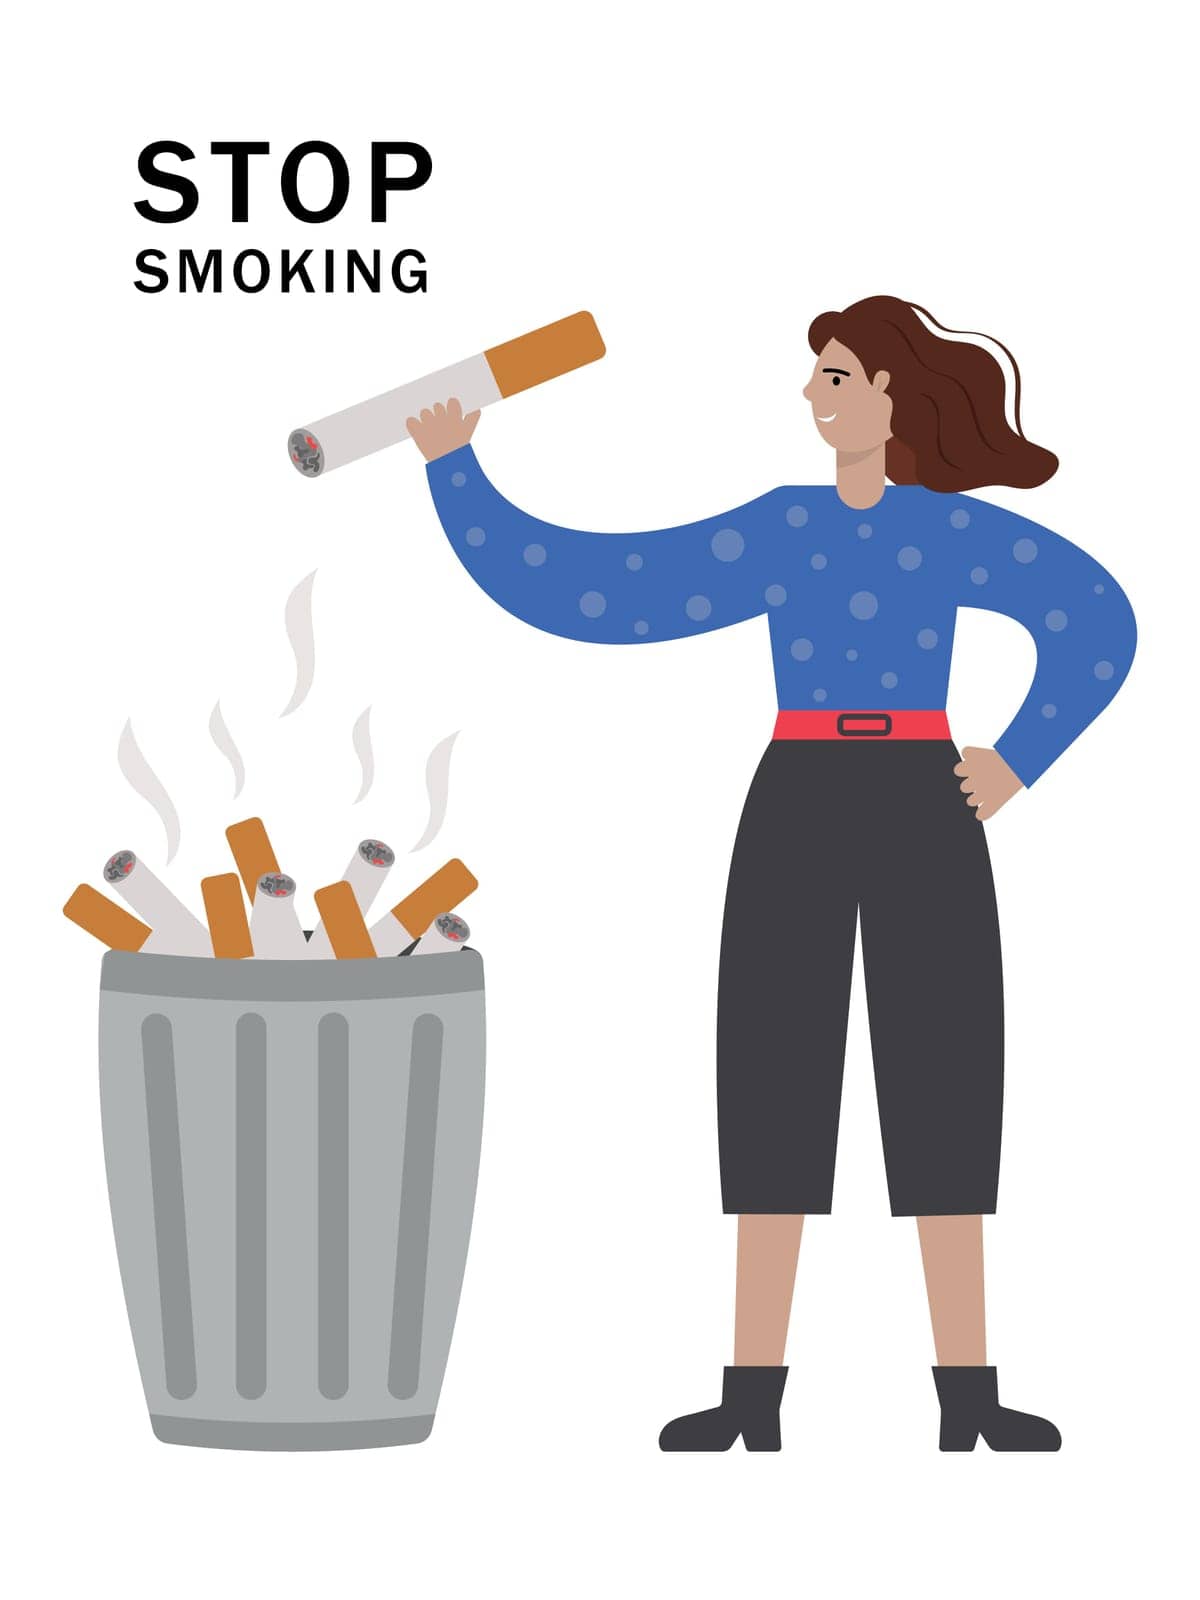 A young girl throws out cigarettes. The woman quit smoking. Self-improvement, self-improvement, self-care. by Byrka